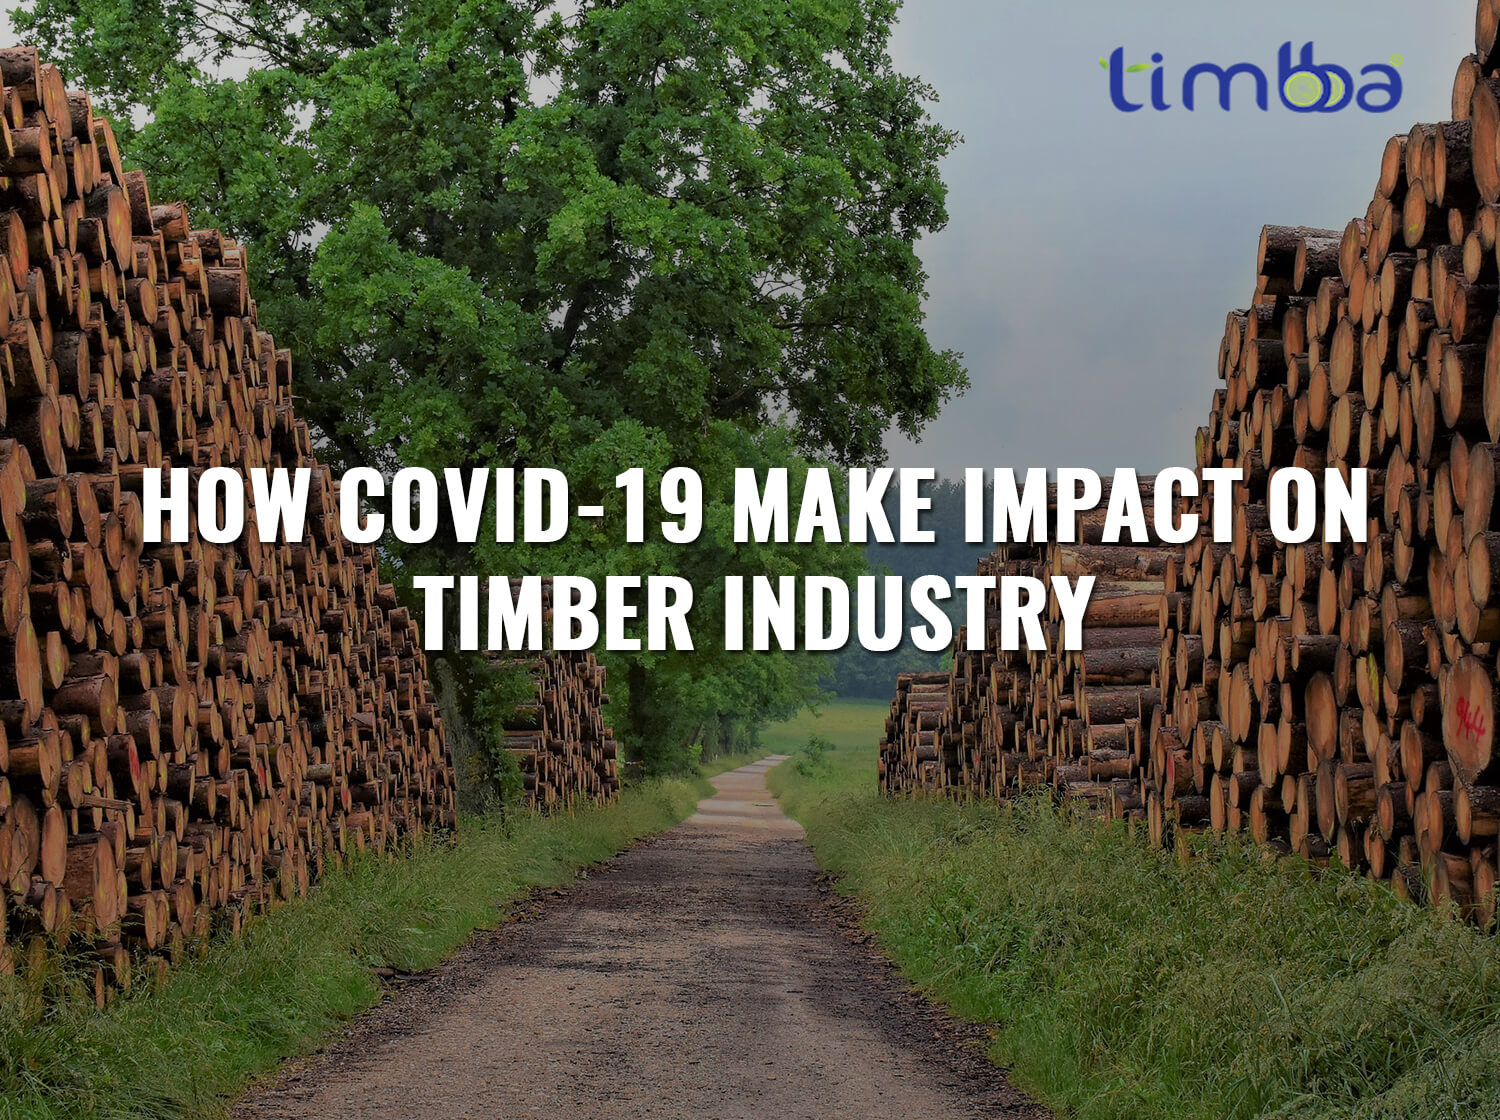 How Covid-19 Make Impact on Indian Timber Industry